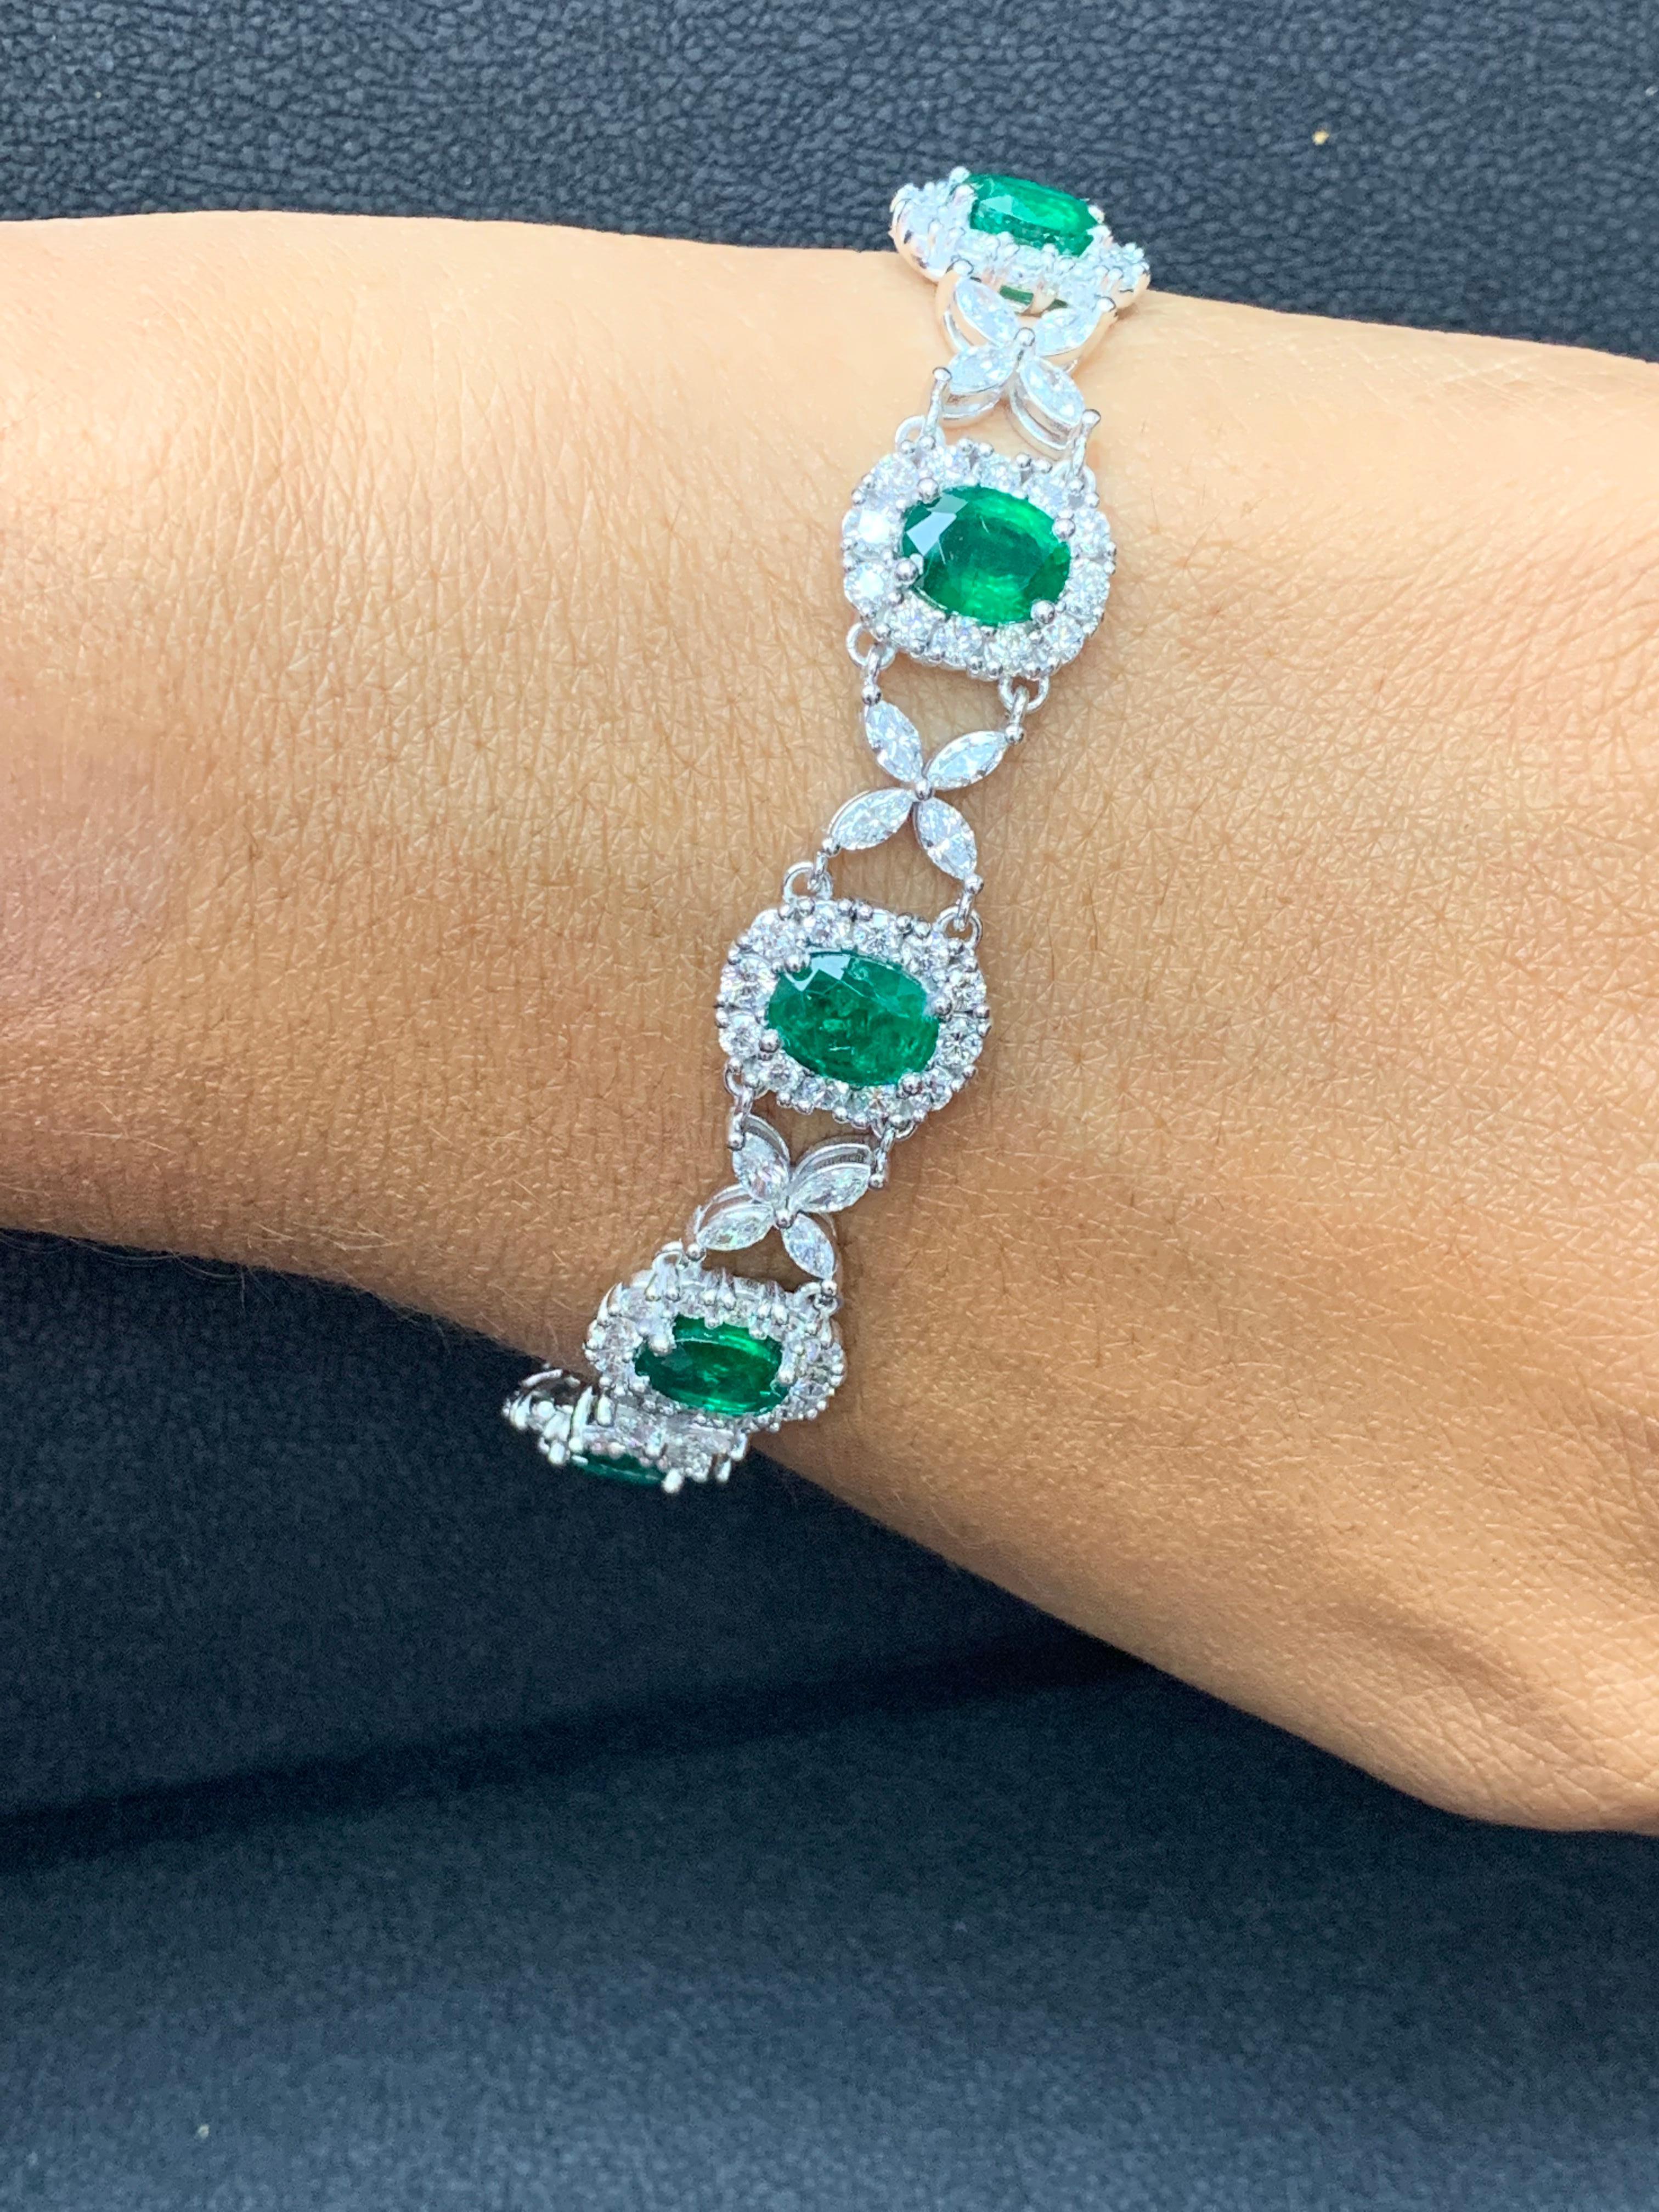 10.52 Carat Oval Cut Emerald and Diamond Tennis Bracelet in 14K White Gold For Sale 9